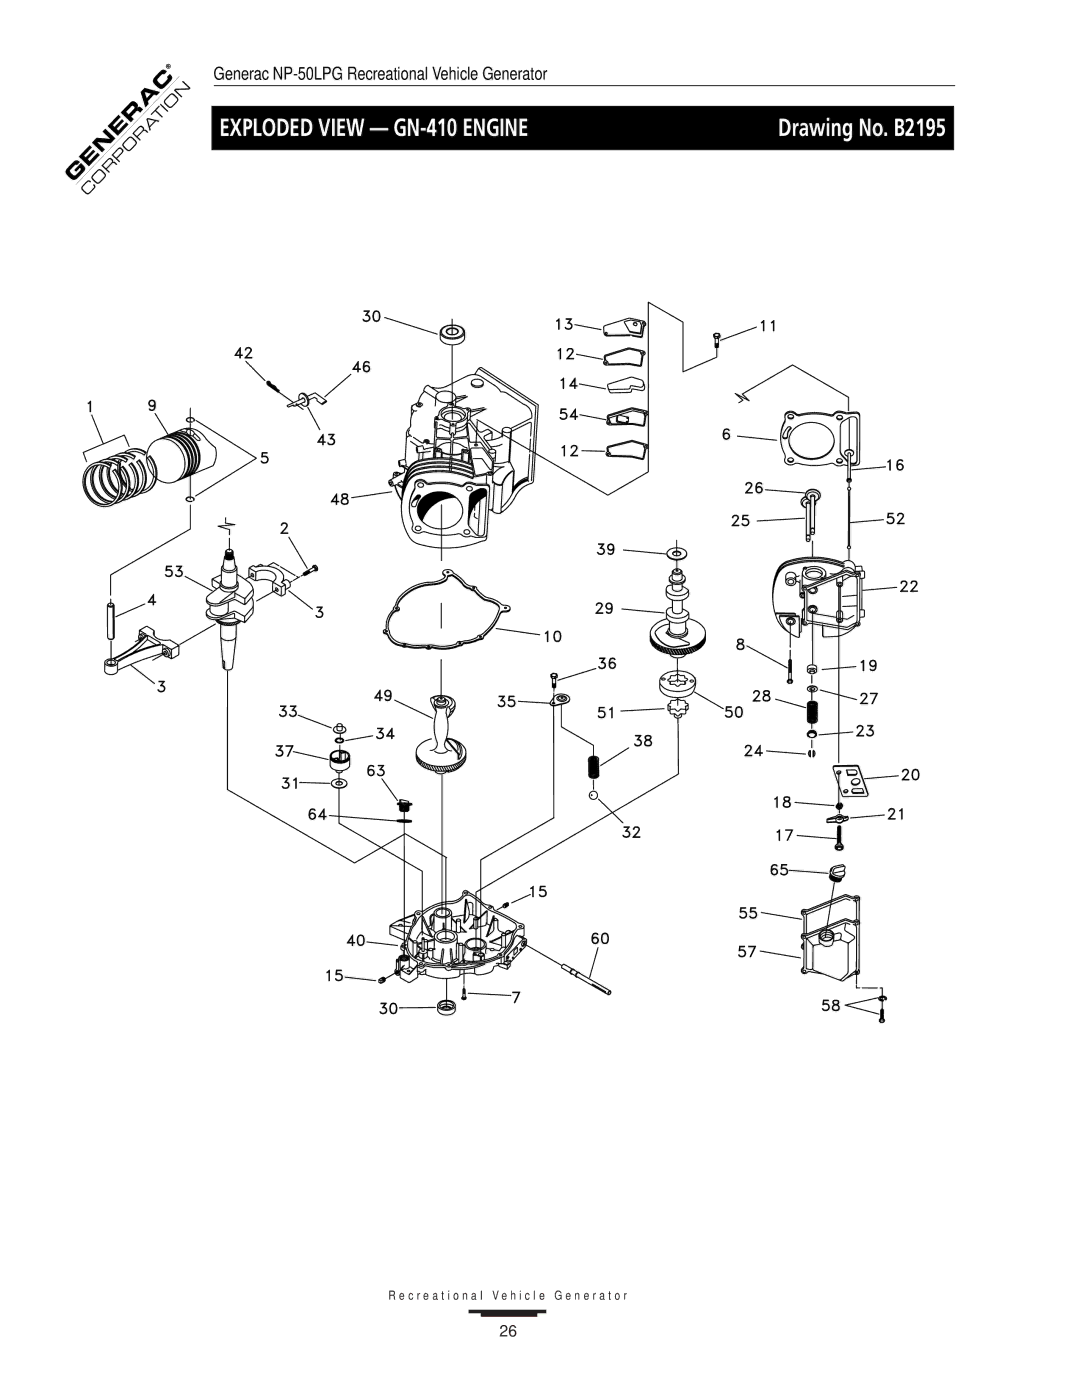 Generac 00919-0, NP-50LPG owner manual Exploded View GN-410 Engine, Drawing No. B2195 